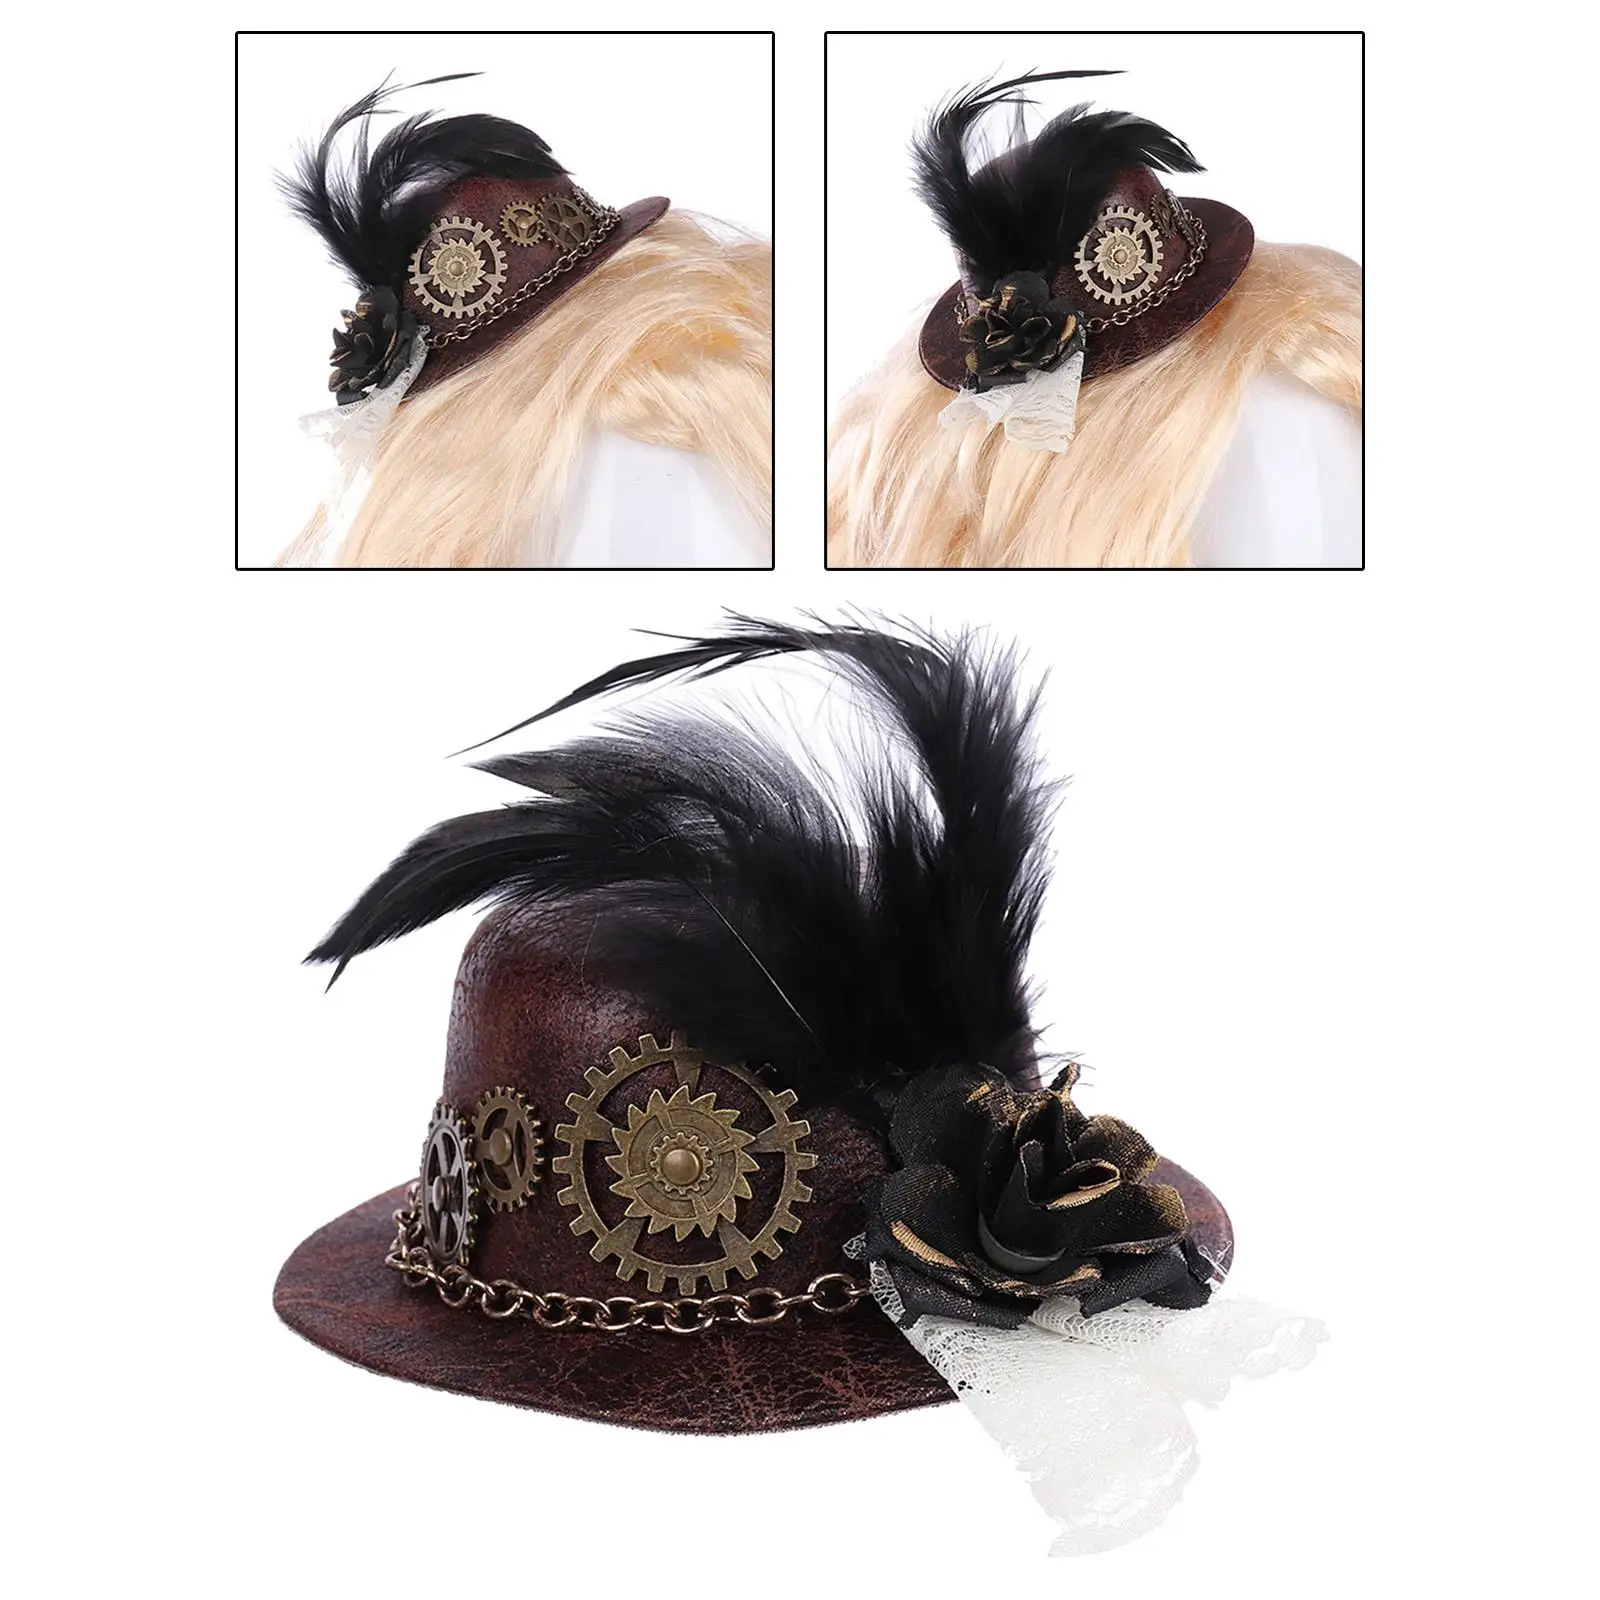 Retro Punk Gothic  Hat  Feather Hair Clip, Accessories for  Carnival  Costume DIY Yourself Jazz Hat